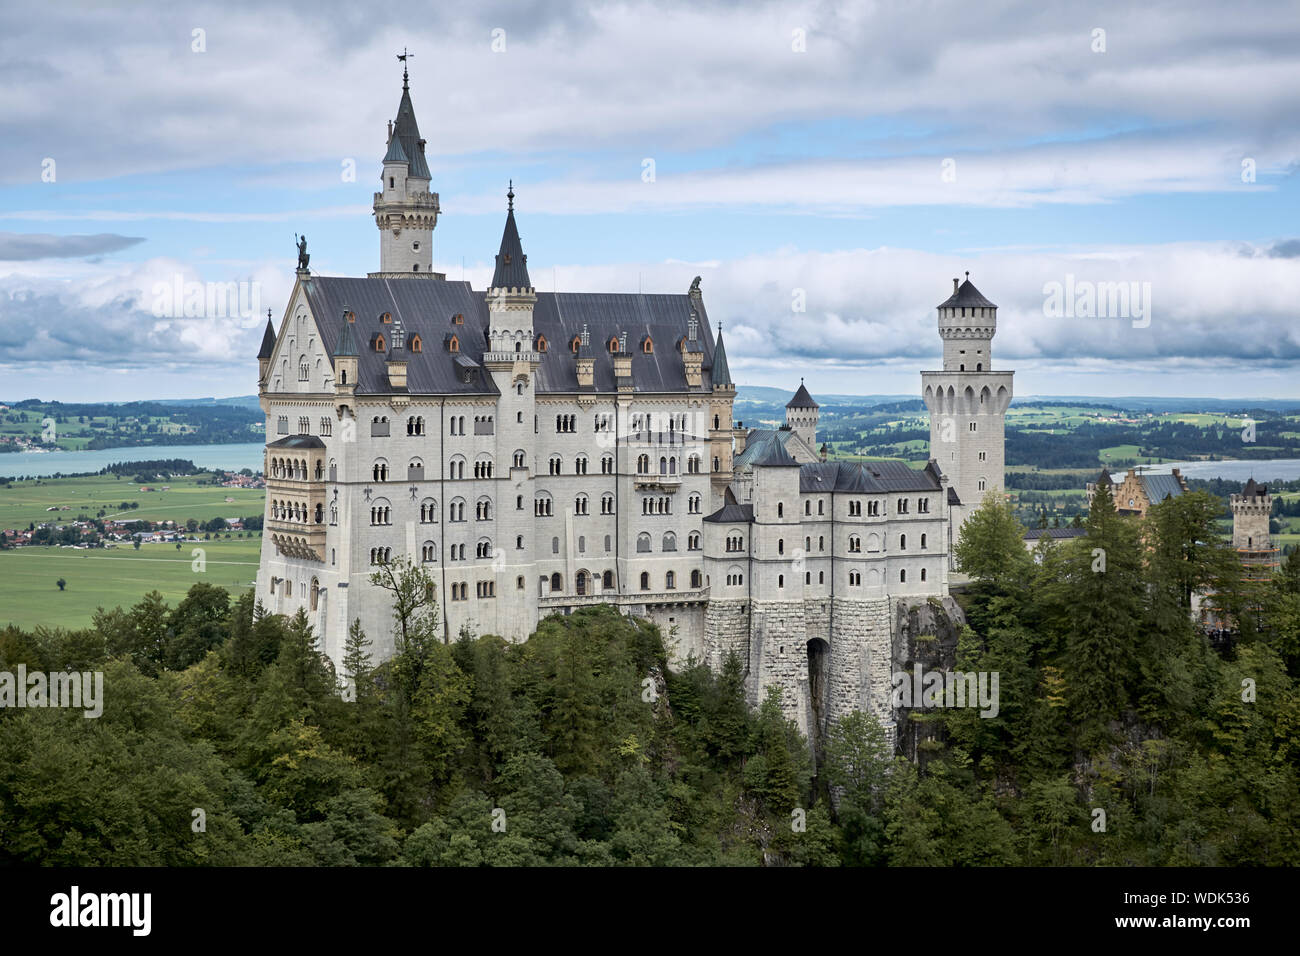 View of the famous tourist attraction in the Bavarian Alps - the Neuschwanstein castle infront of blue sky and nature / 2019 Stock Photo